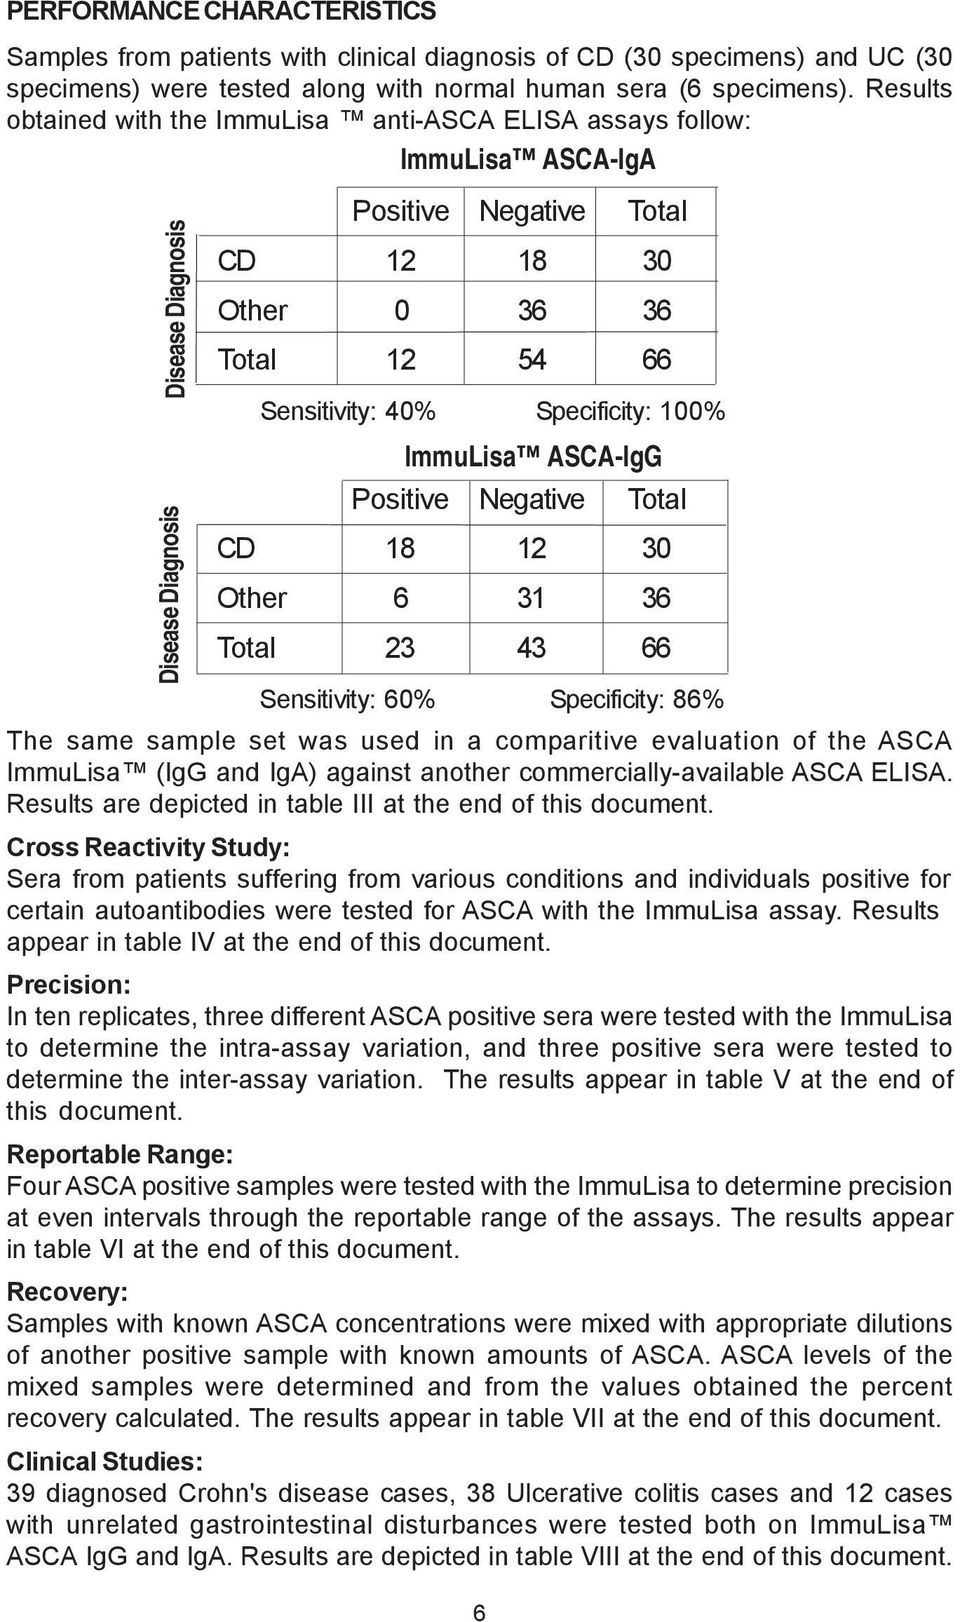 40% Specificity: 100% ImmuLisa ASCA-IgG Positive Negative Total CD 18 12 30 Other 6 31 36 Total 23 43 66 Sensitivity: 60% Specificity: 86% The same sample set was used in a comparitive evaluation of